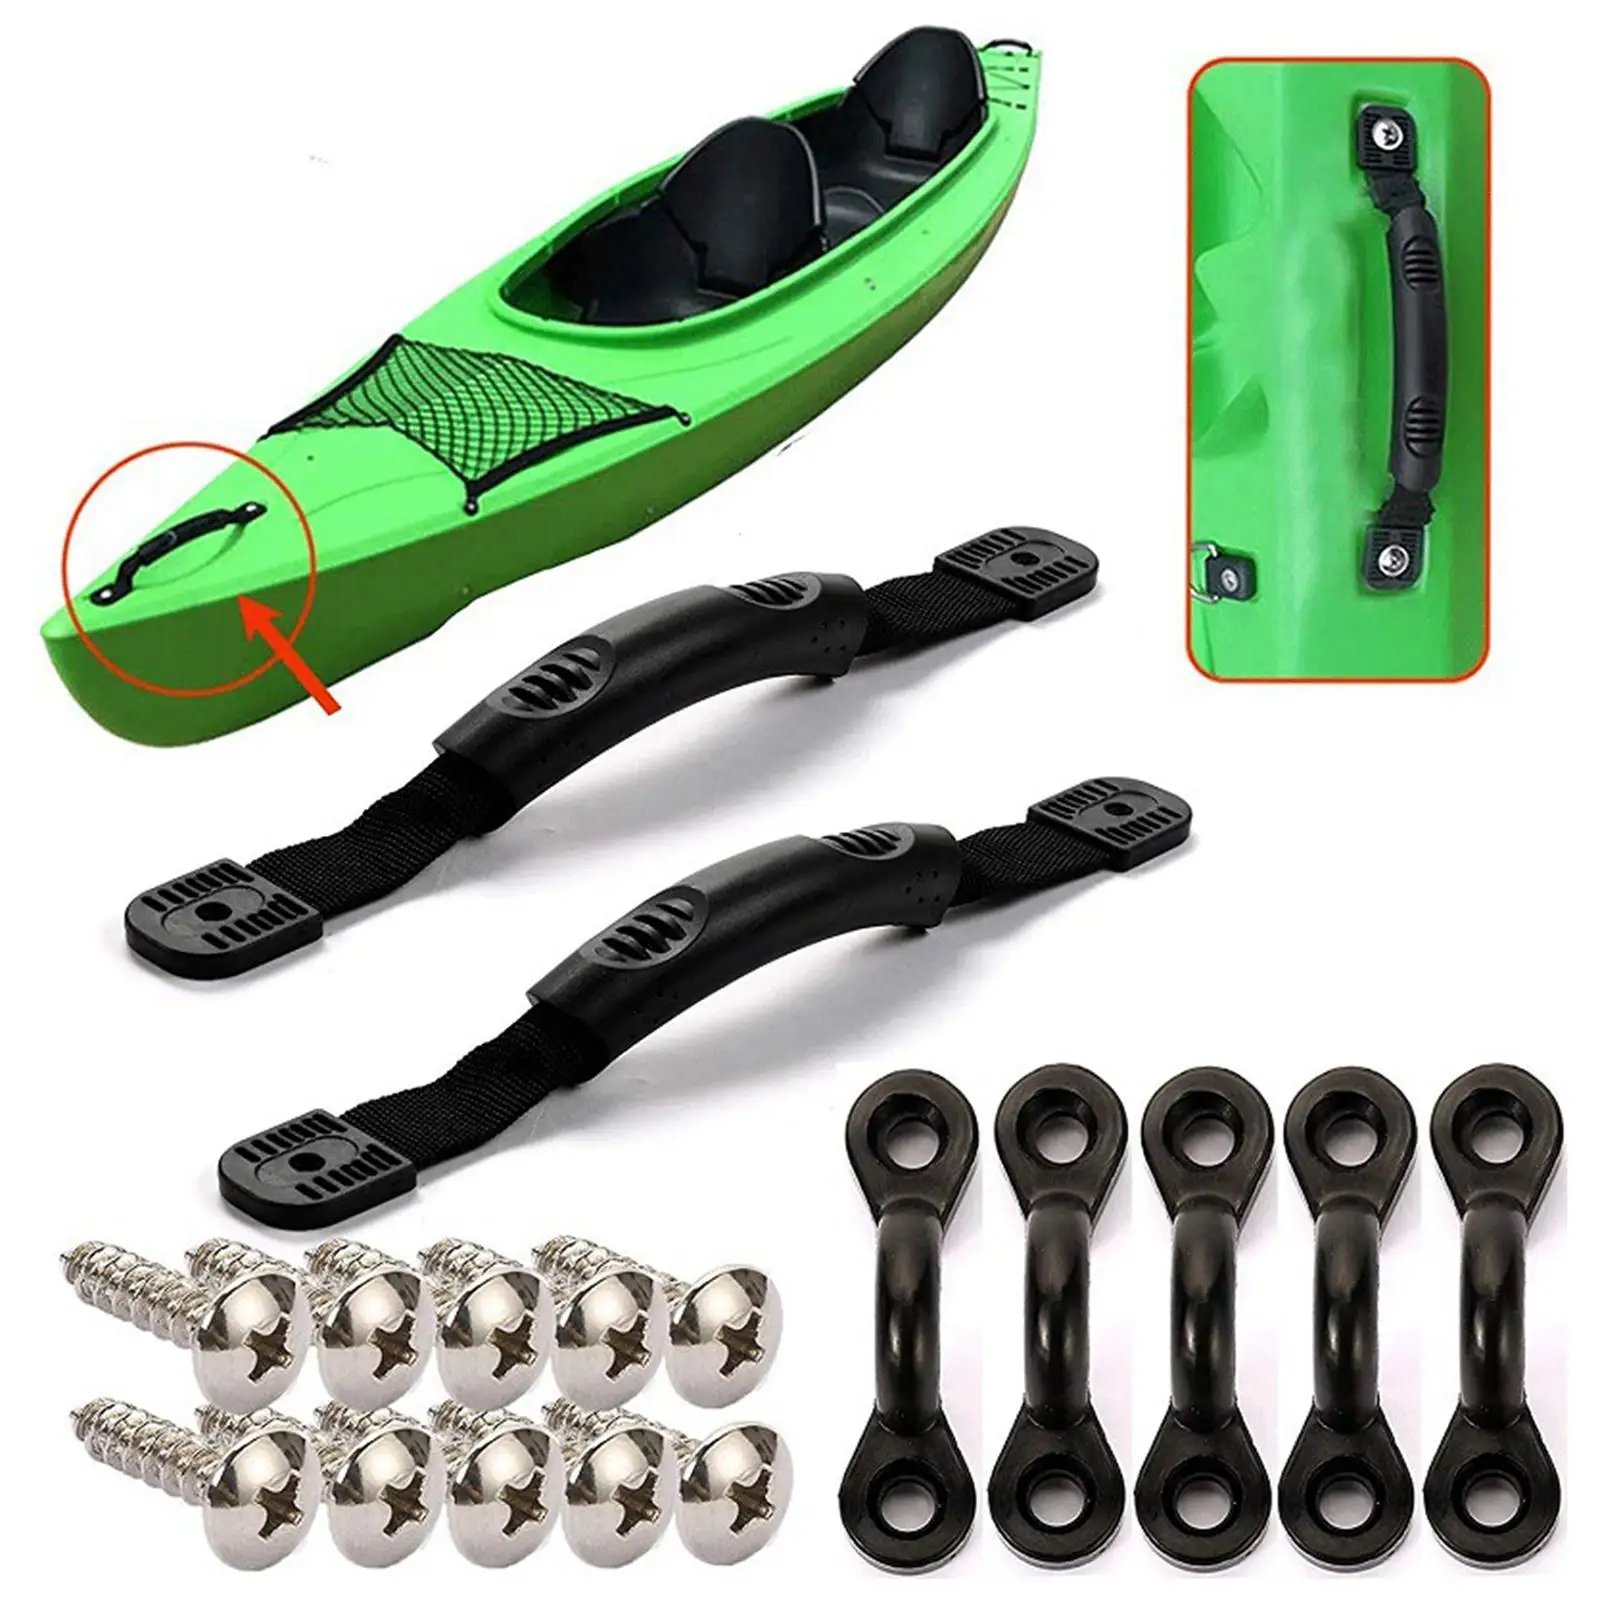 Kayak Canoe Carry Handles Kayak Side Mount with Pad Eyes with Screws Replacement Canoes Boats Kayak Accessories Kayaks